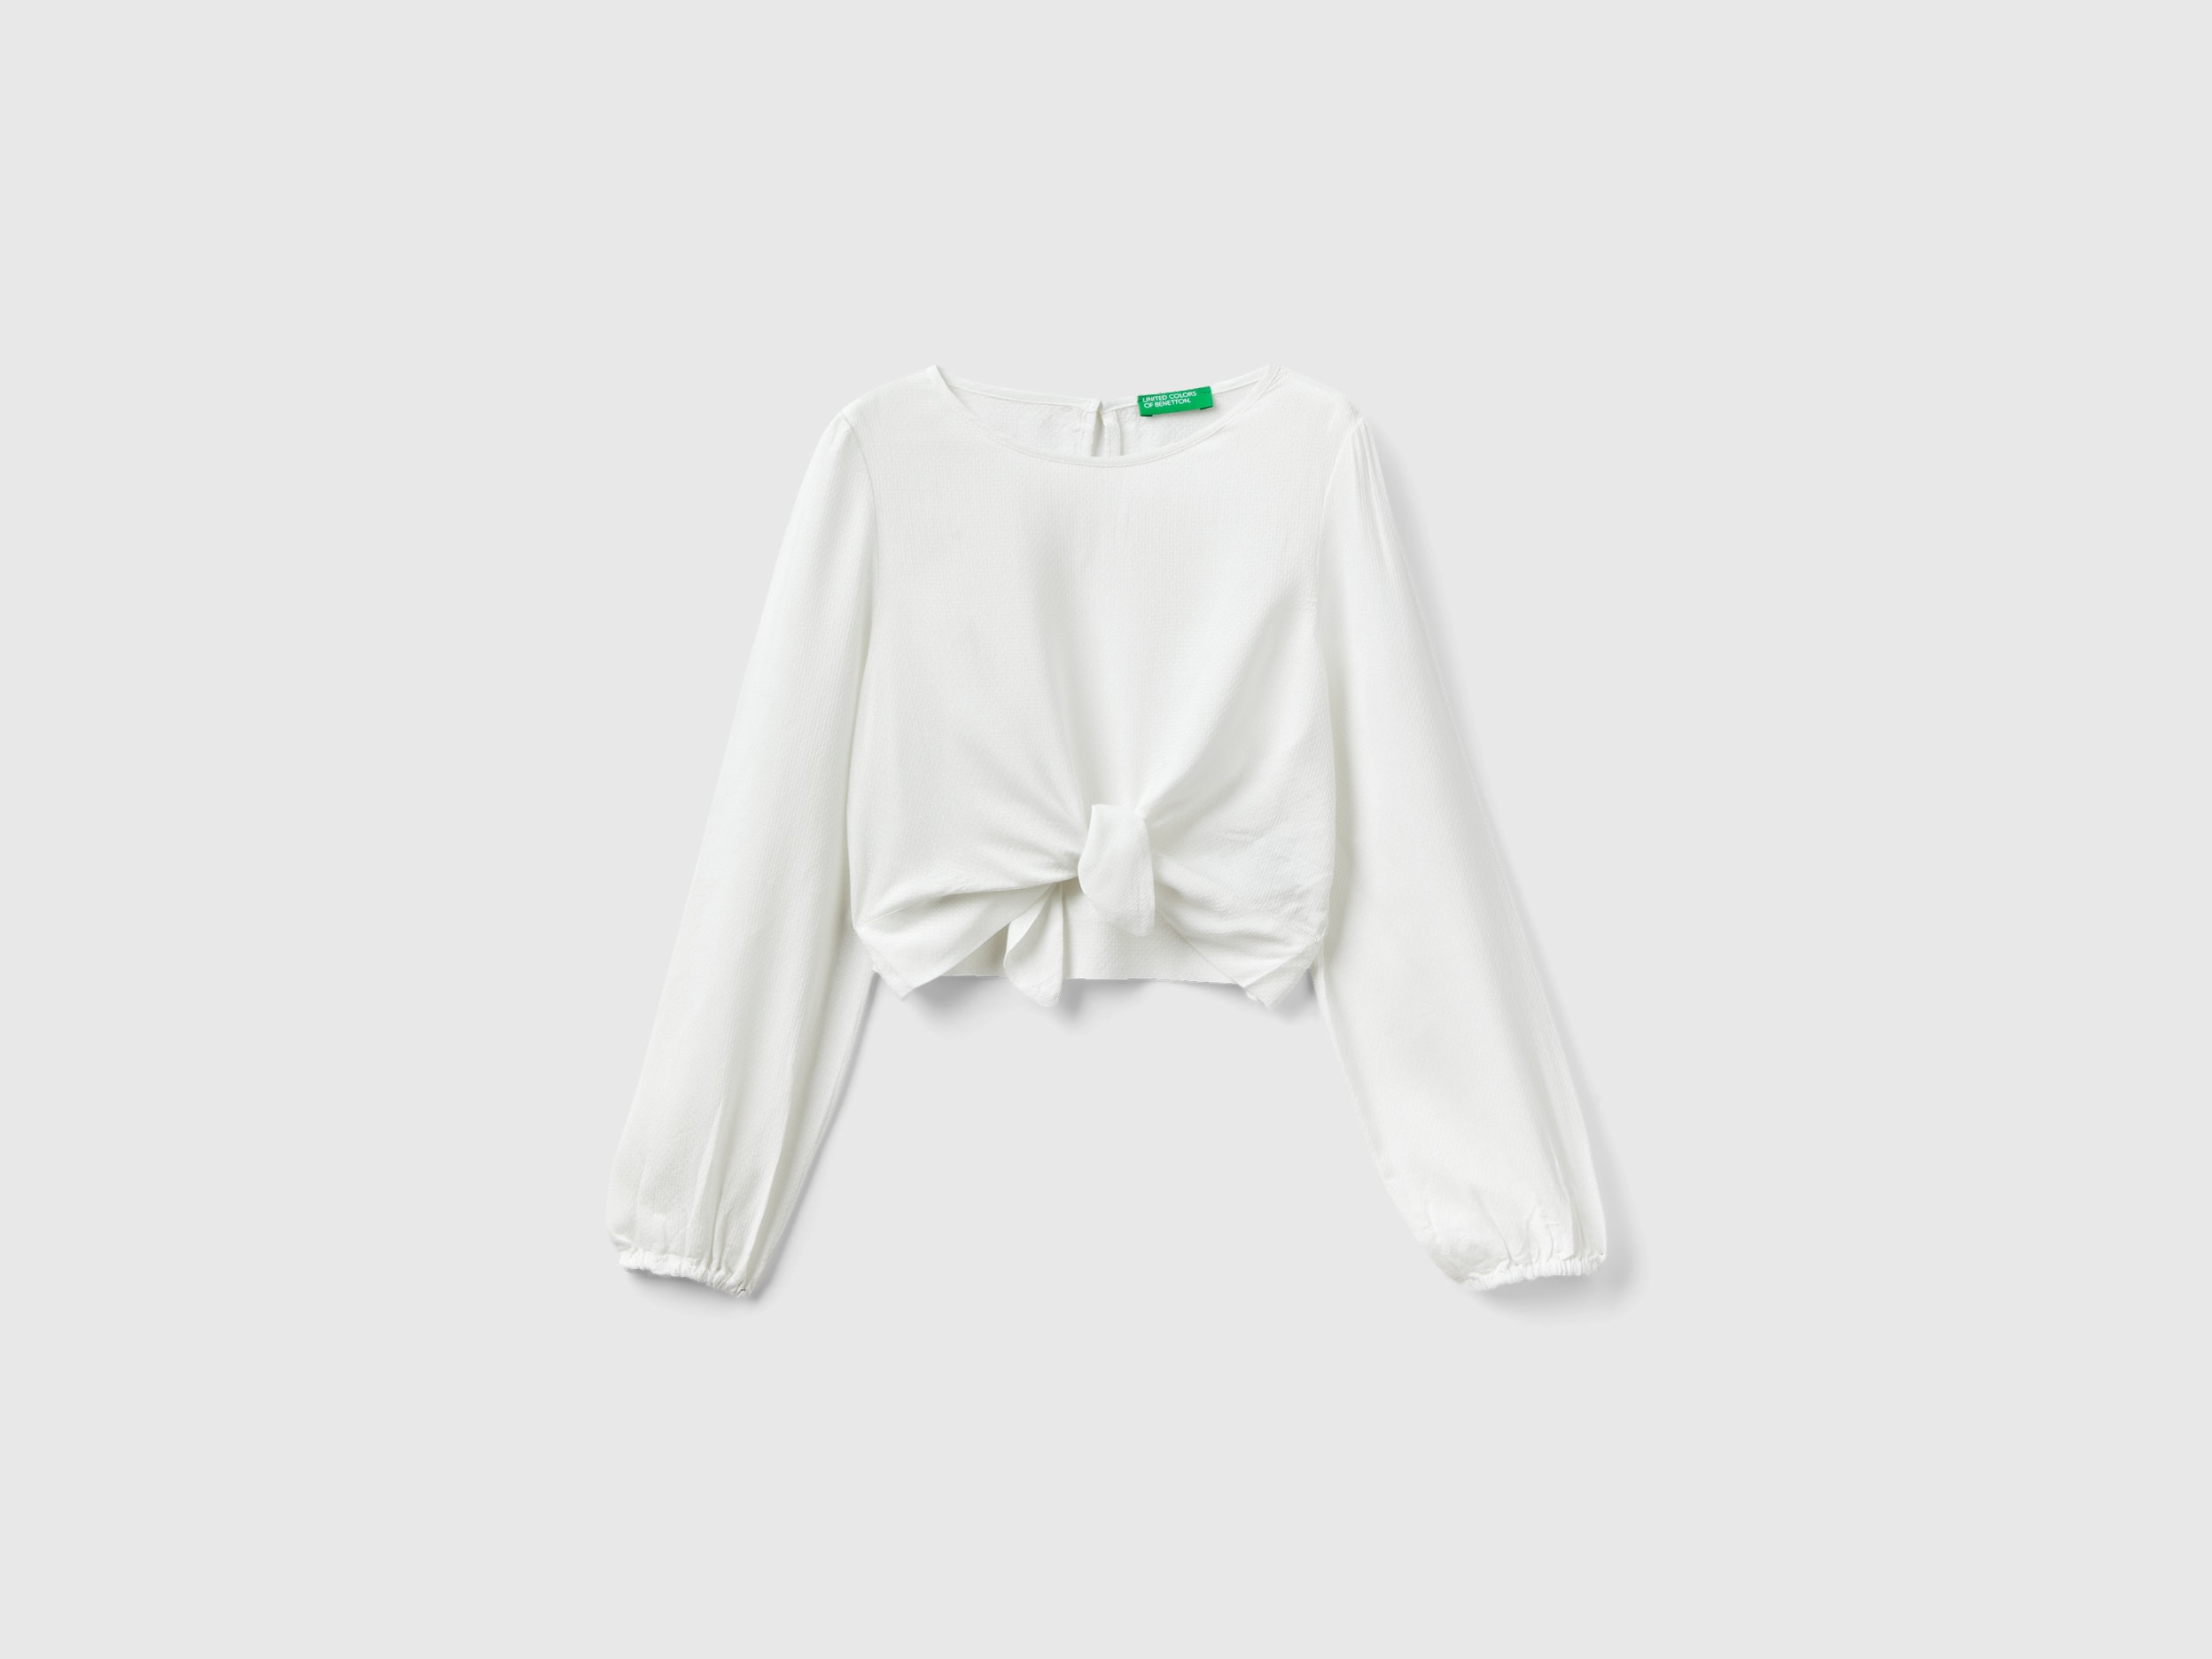 Benetton, Cropped Blouse With Knot, size S, Creamy White, Kids